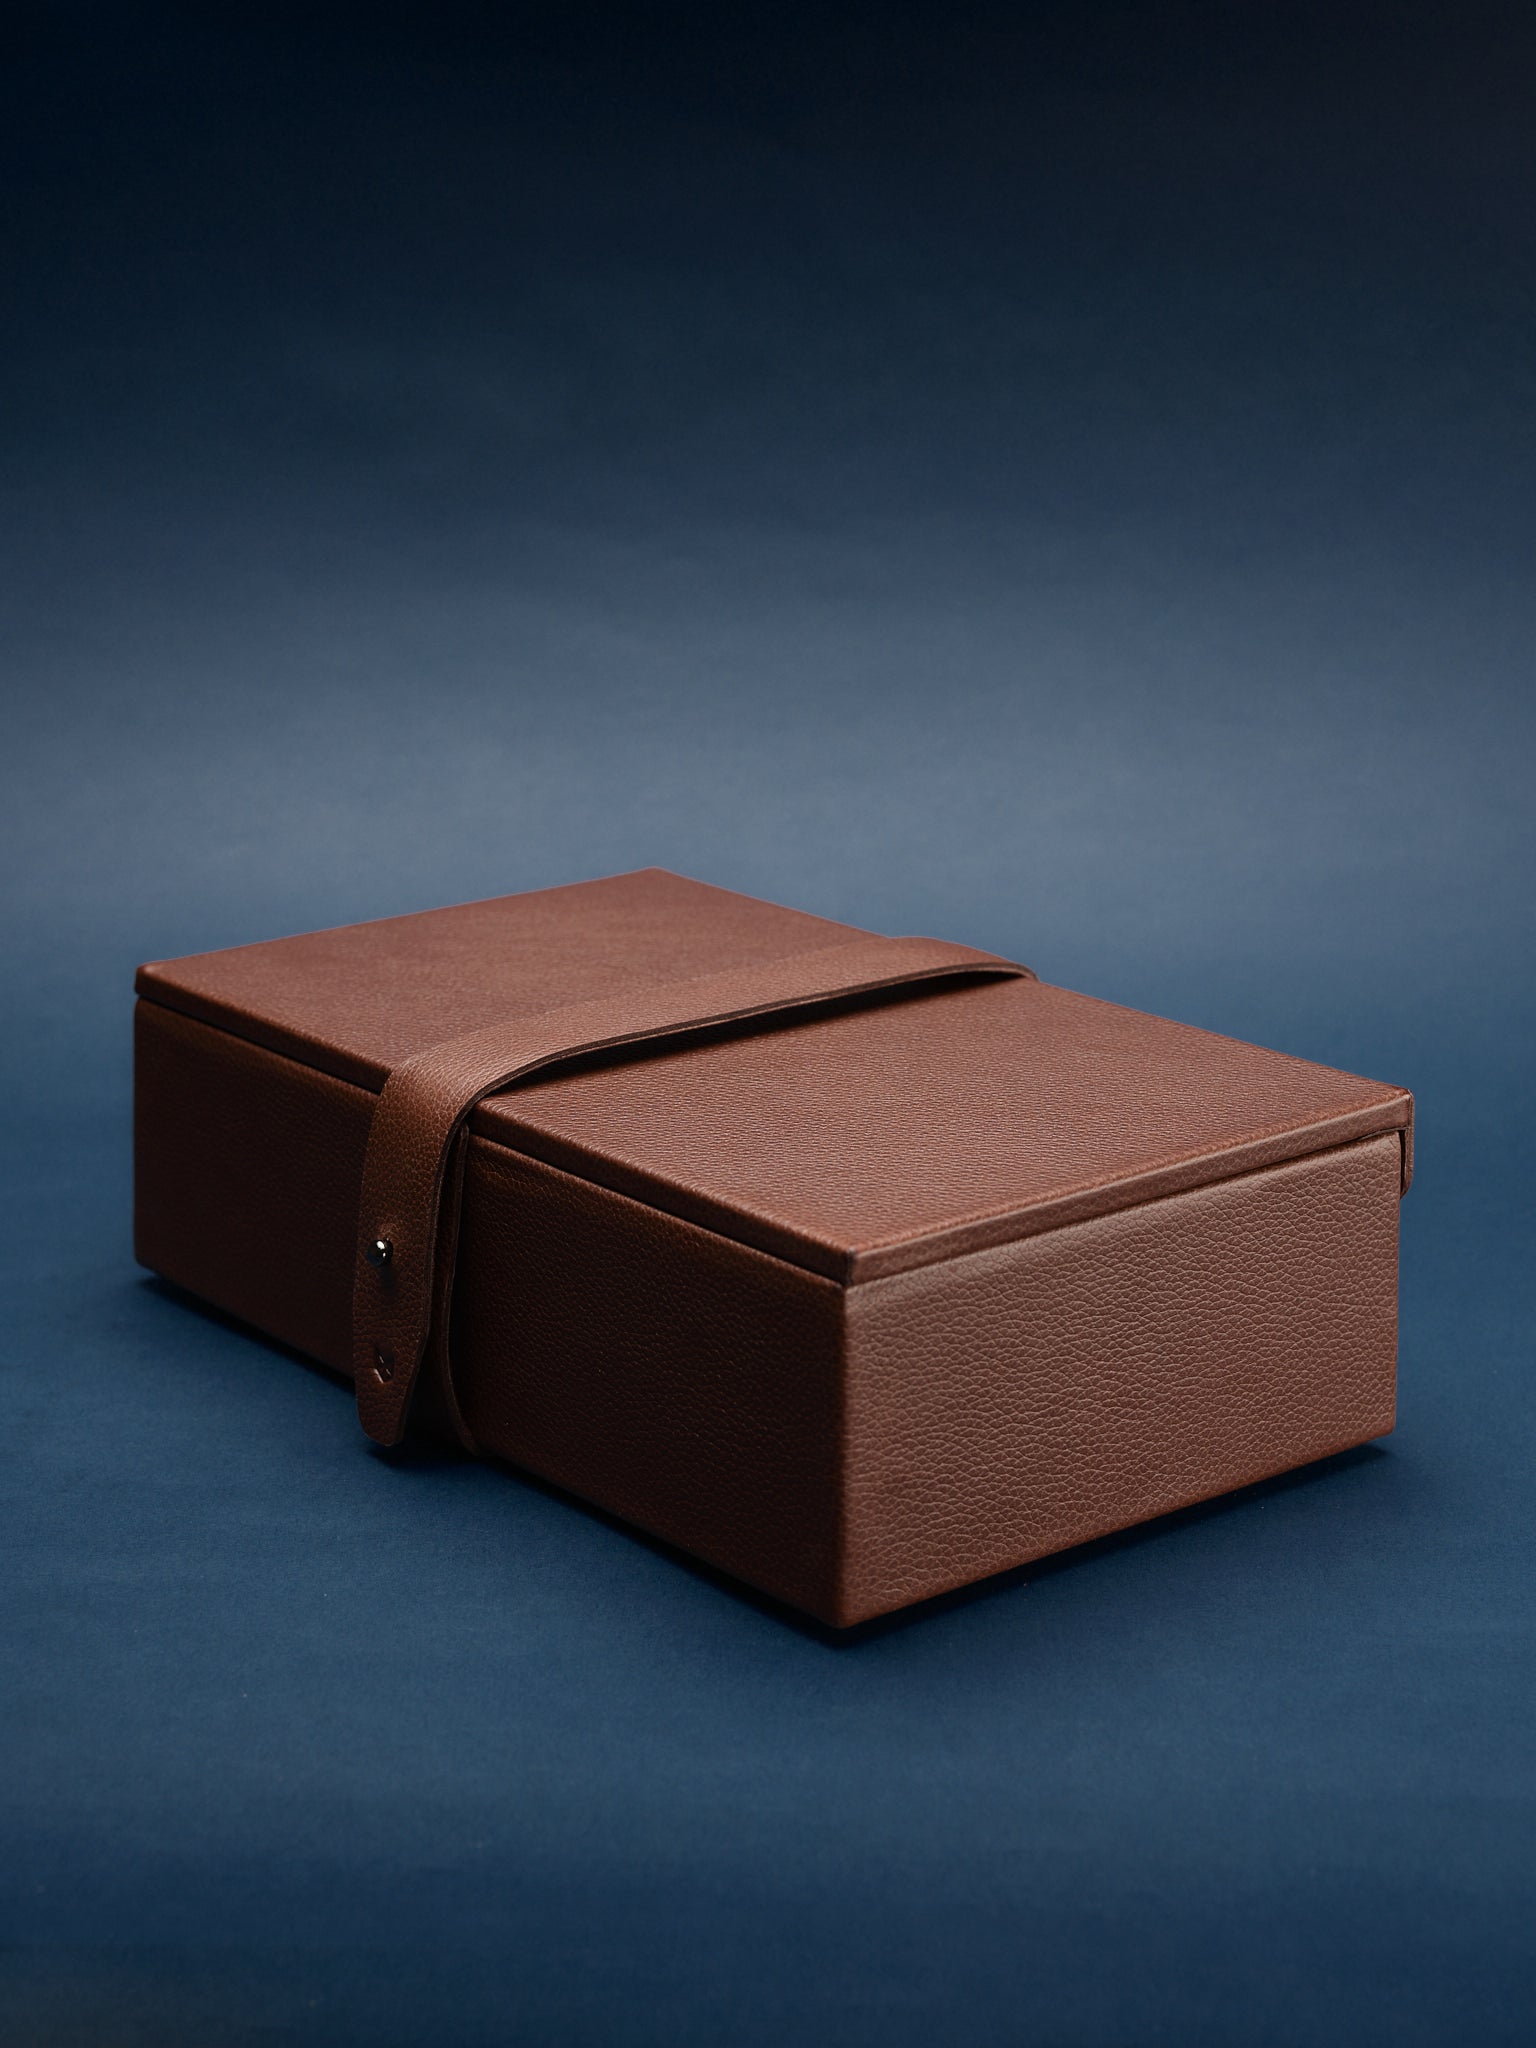 Leather strap. Watch Storage Box. Watch Travel Case Brown by Capra Leather